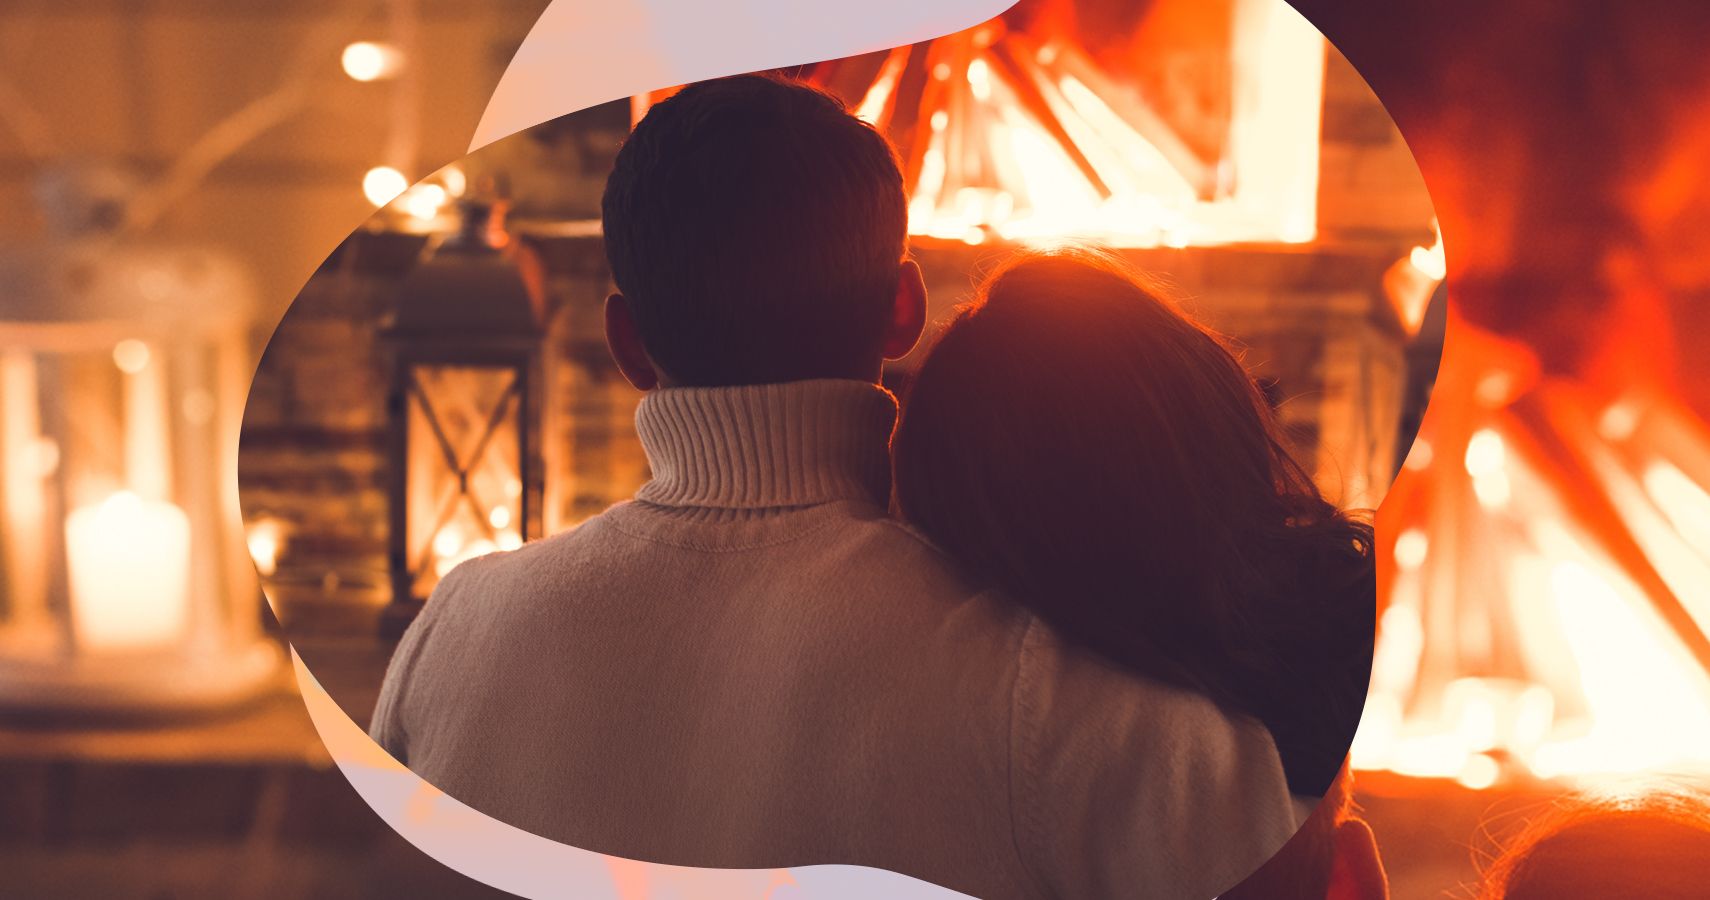 12 Most Romantic Christmas Songs To Enjoy By The Fire